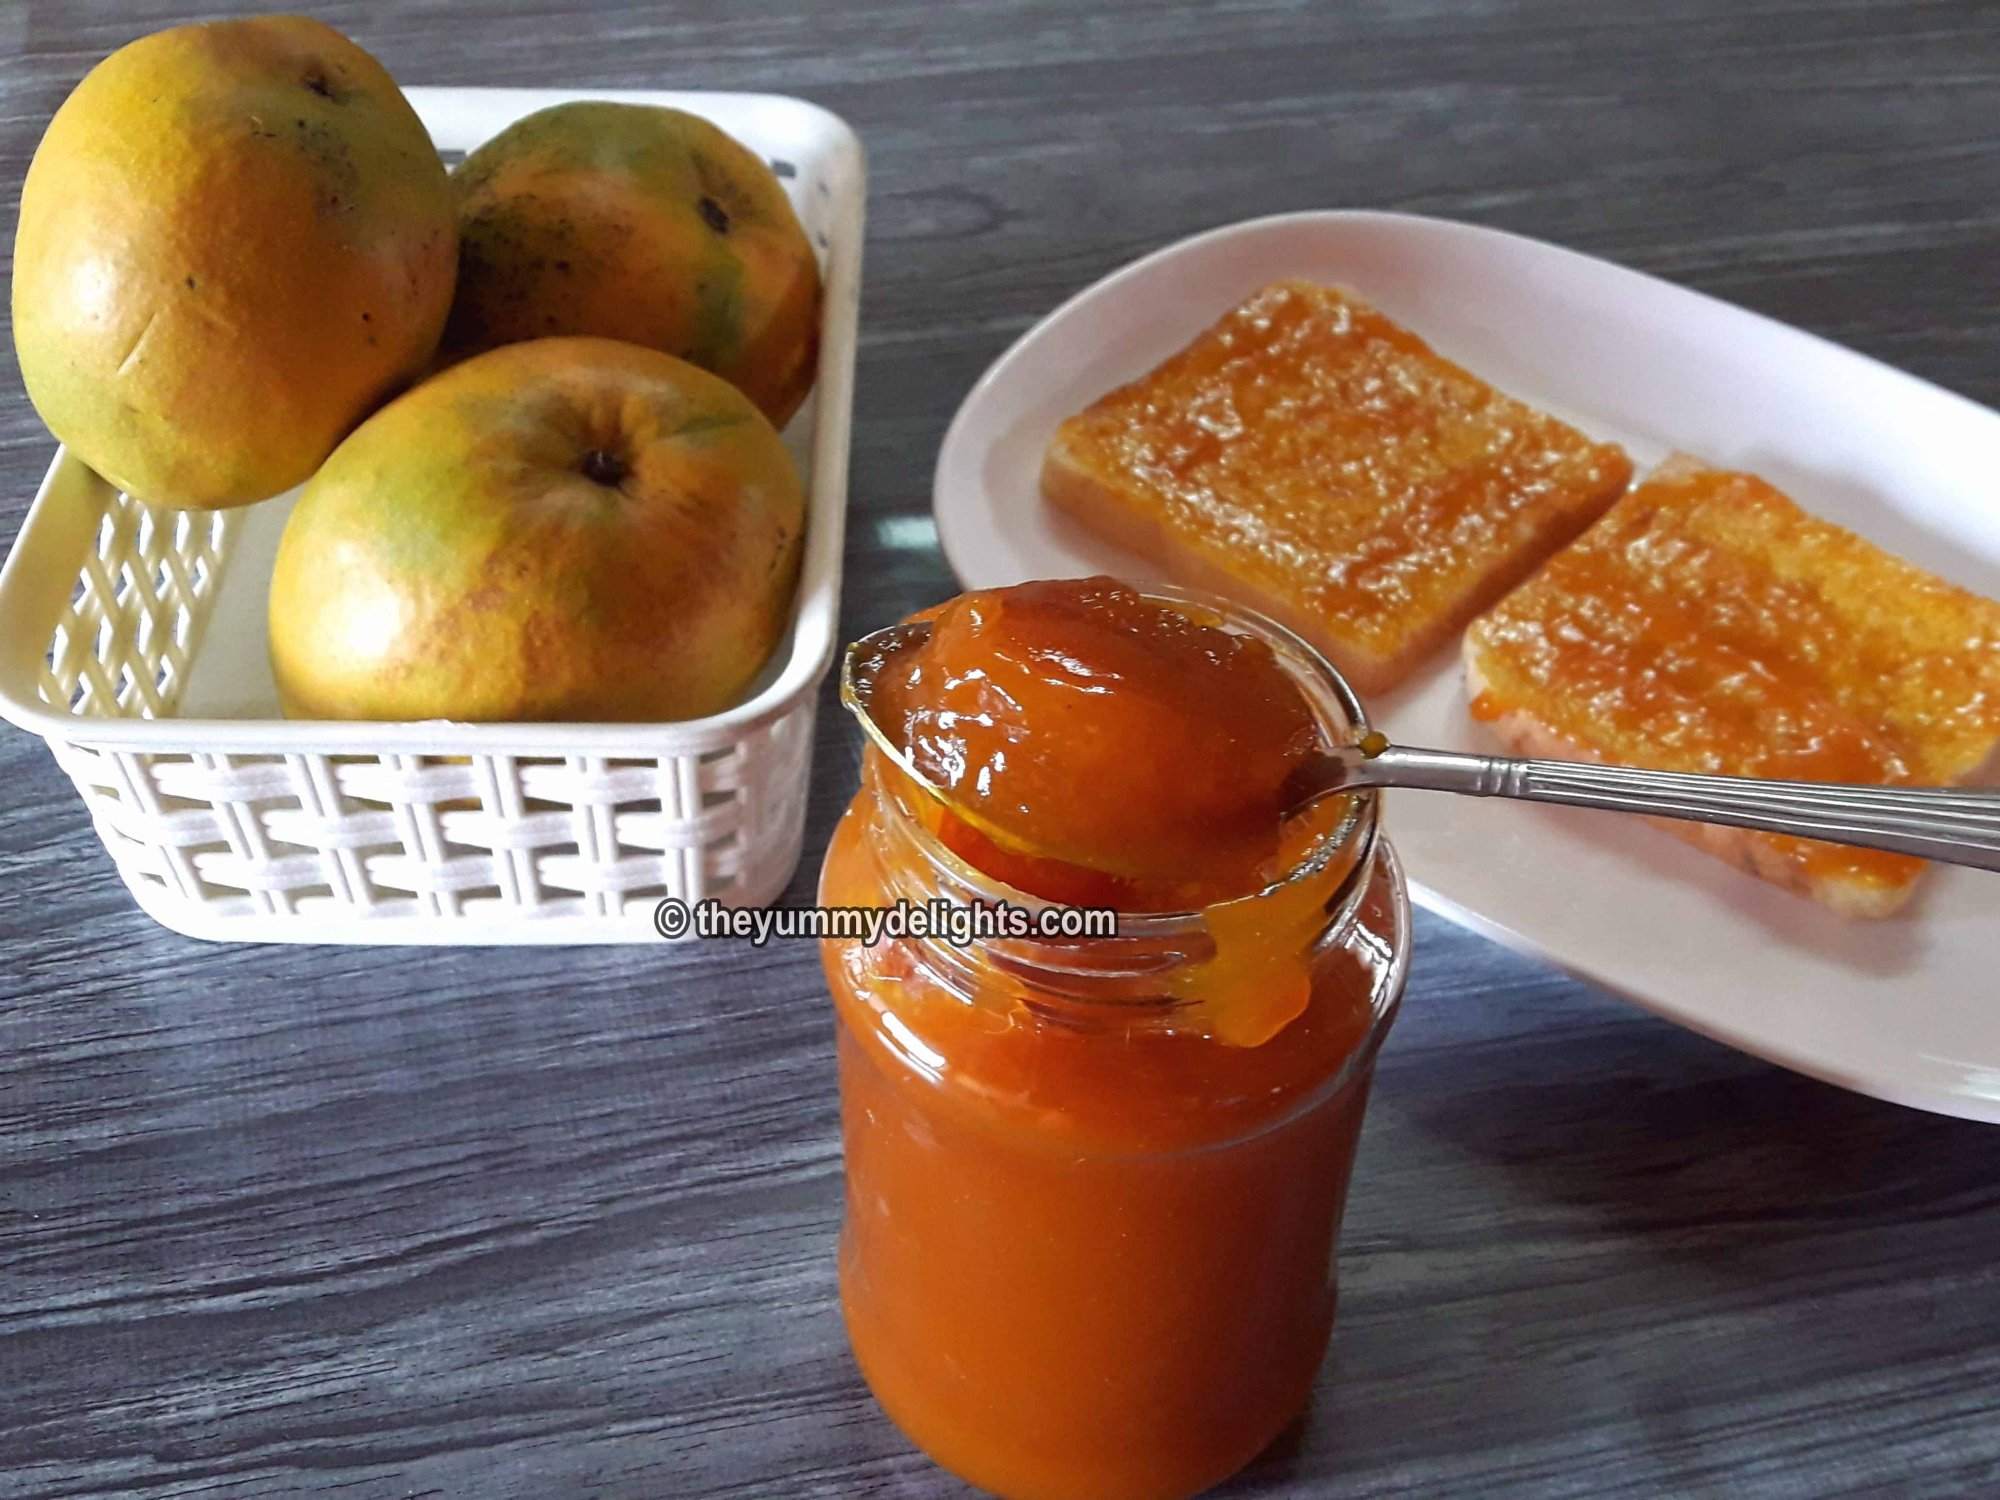 Homemade mango jam recipe (No preservative) with only 3 ingredients